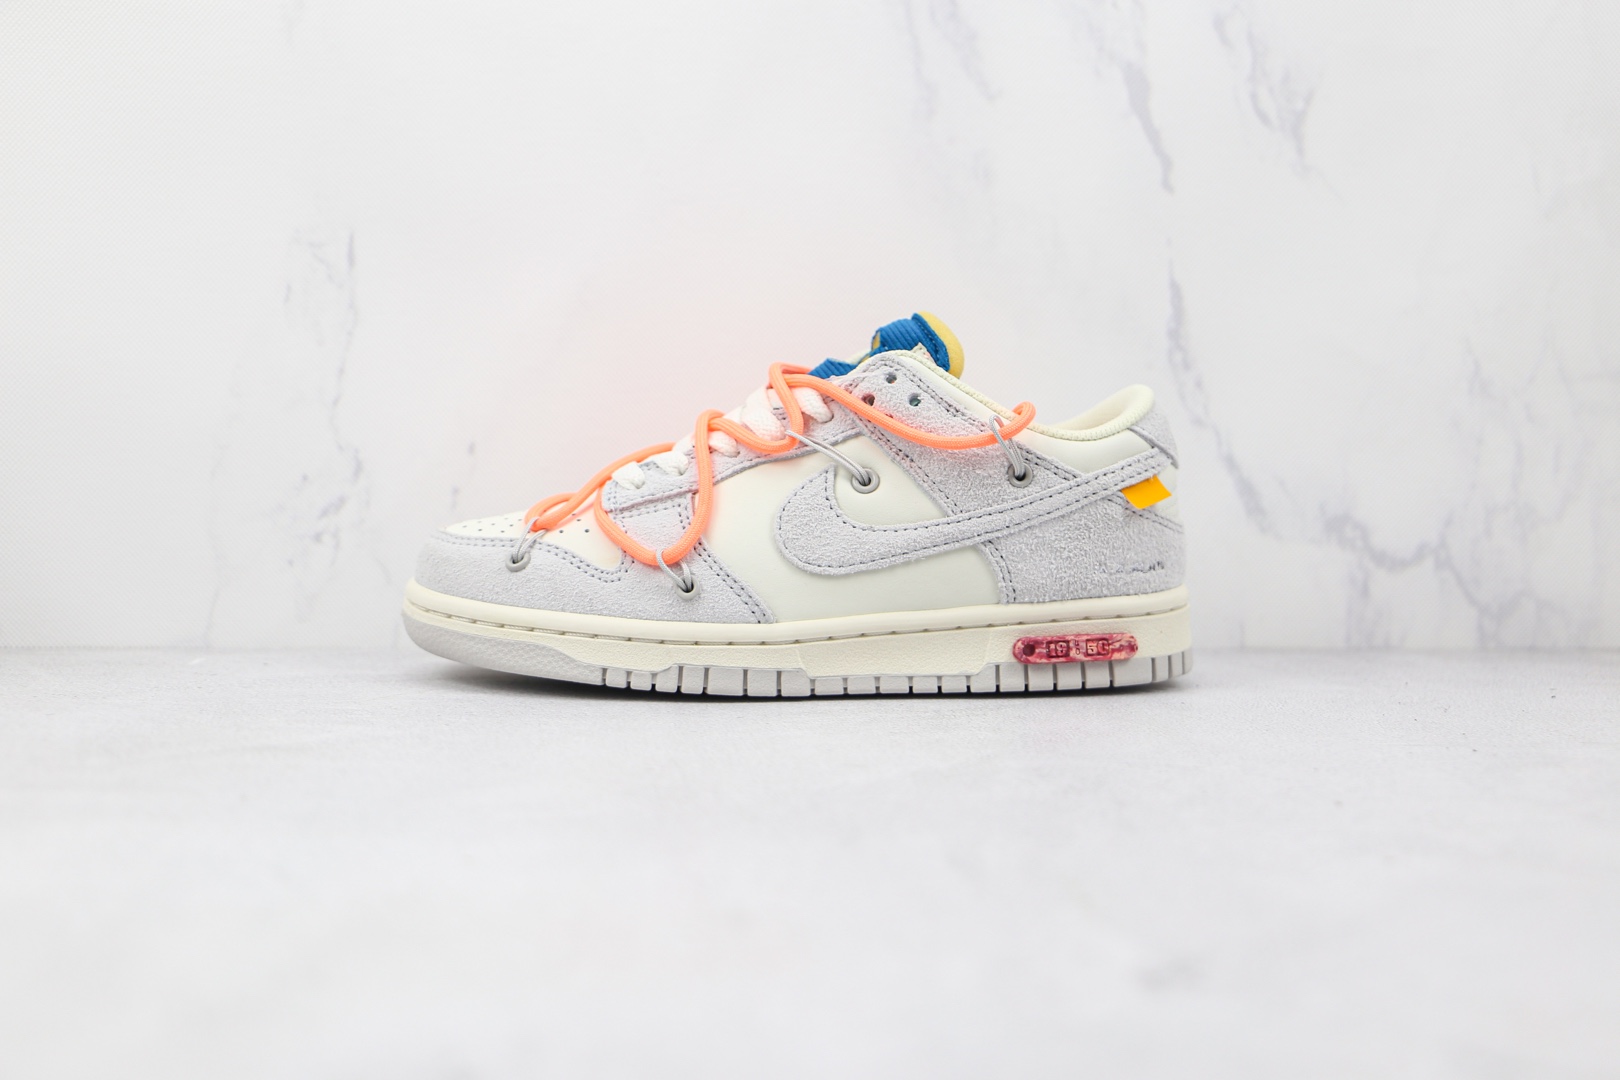 NIKE DUNK LOW off-white  19 of 50 【26.0】